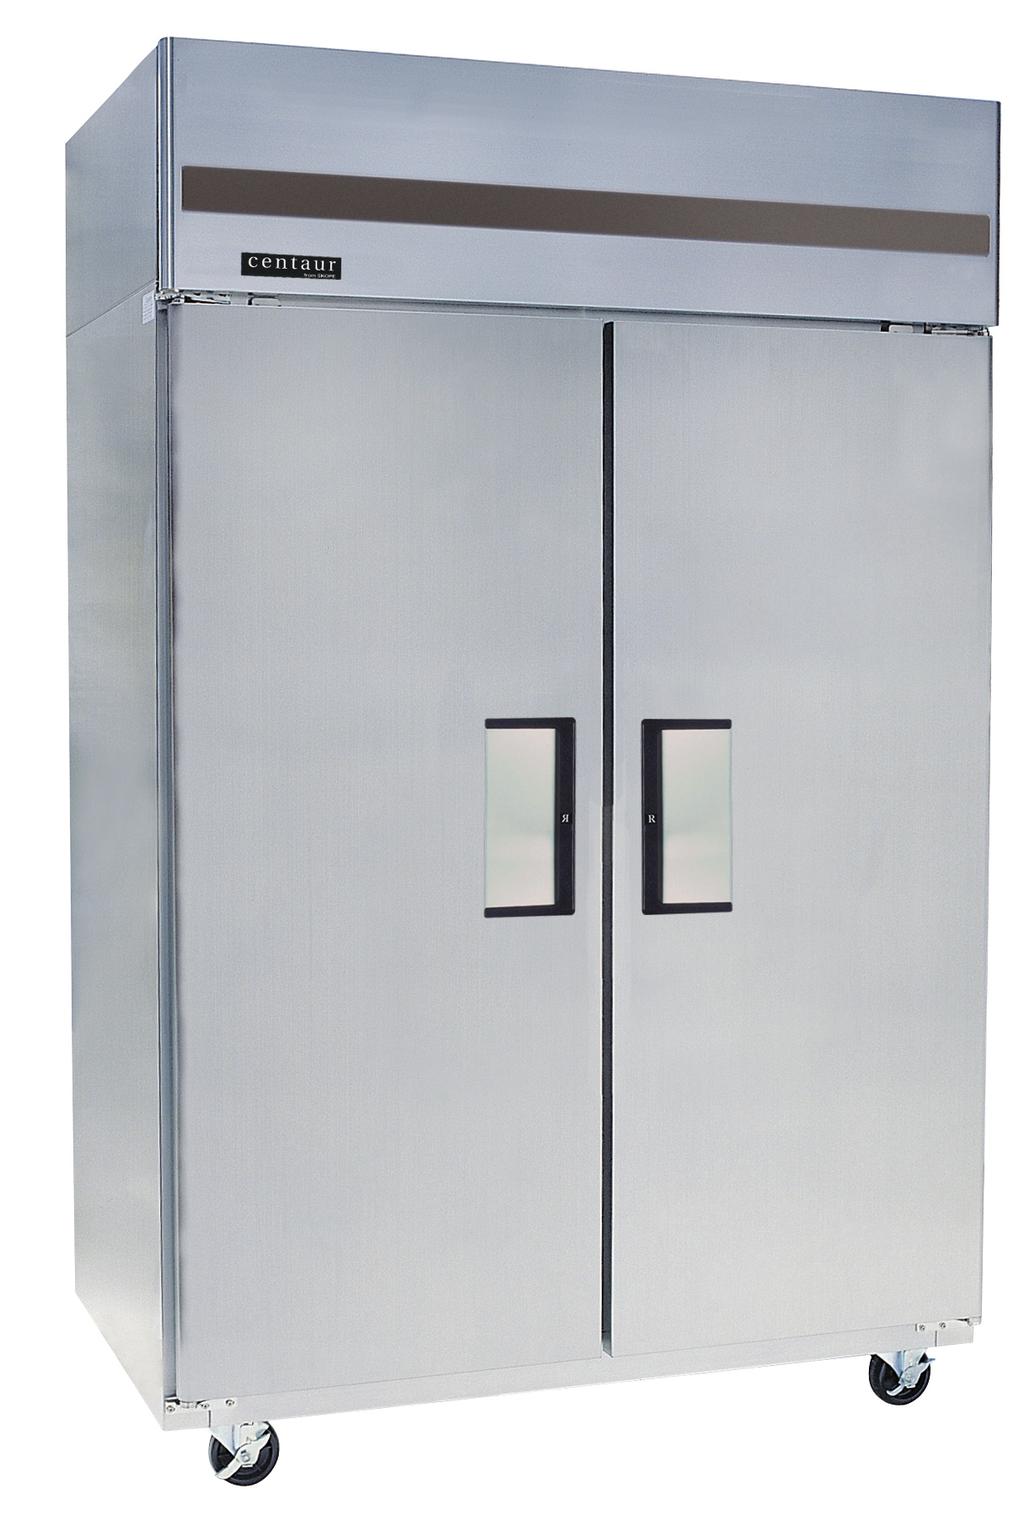 CENTAUR SERIES Standard Range Food Service / Upright Designed with a heavy duty construction these chillers and freezers meet the demands of busy commercial kitchens and food service operations.